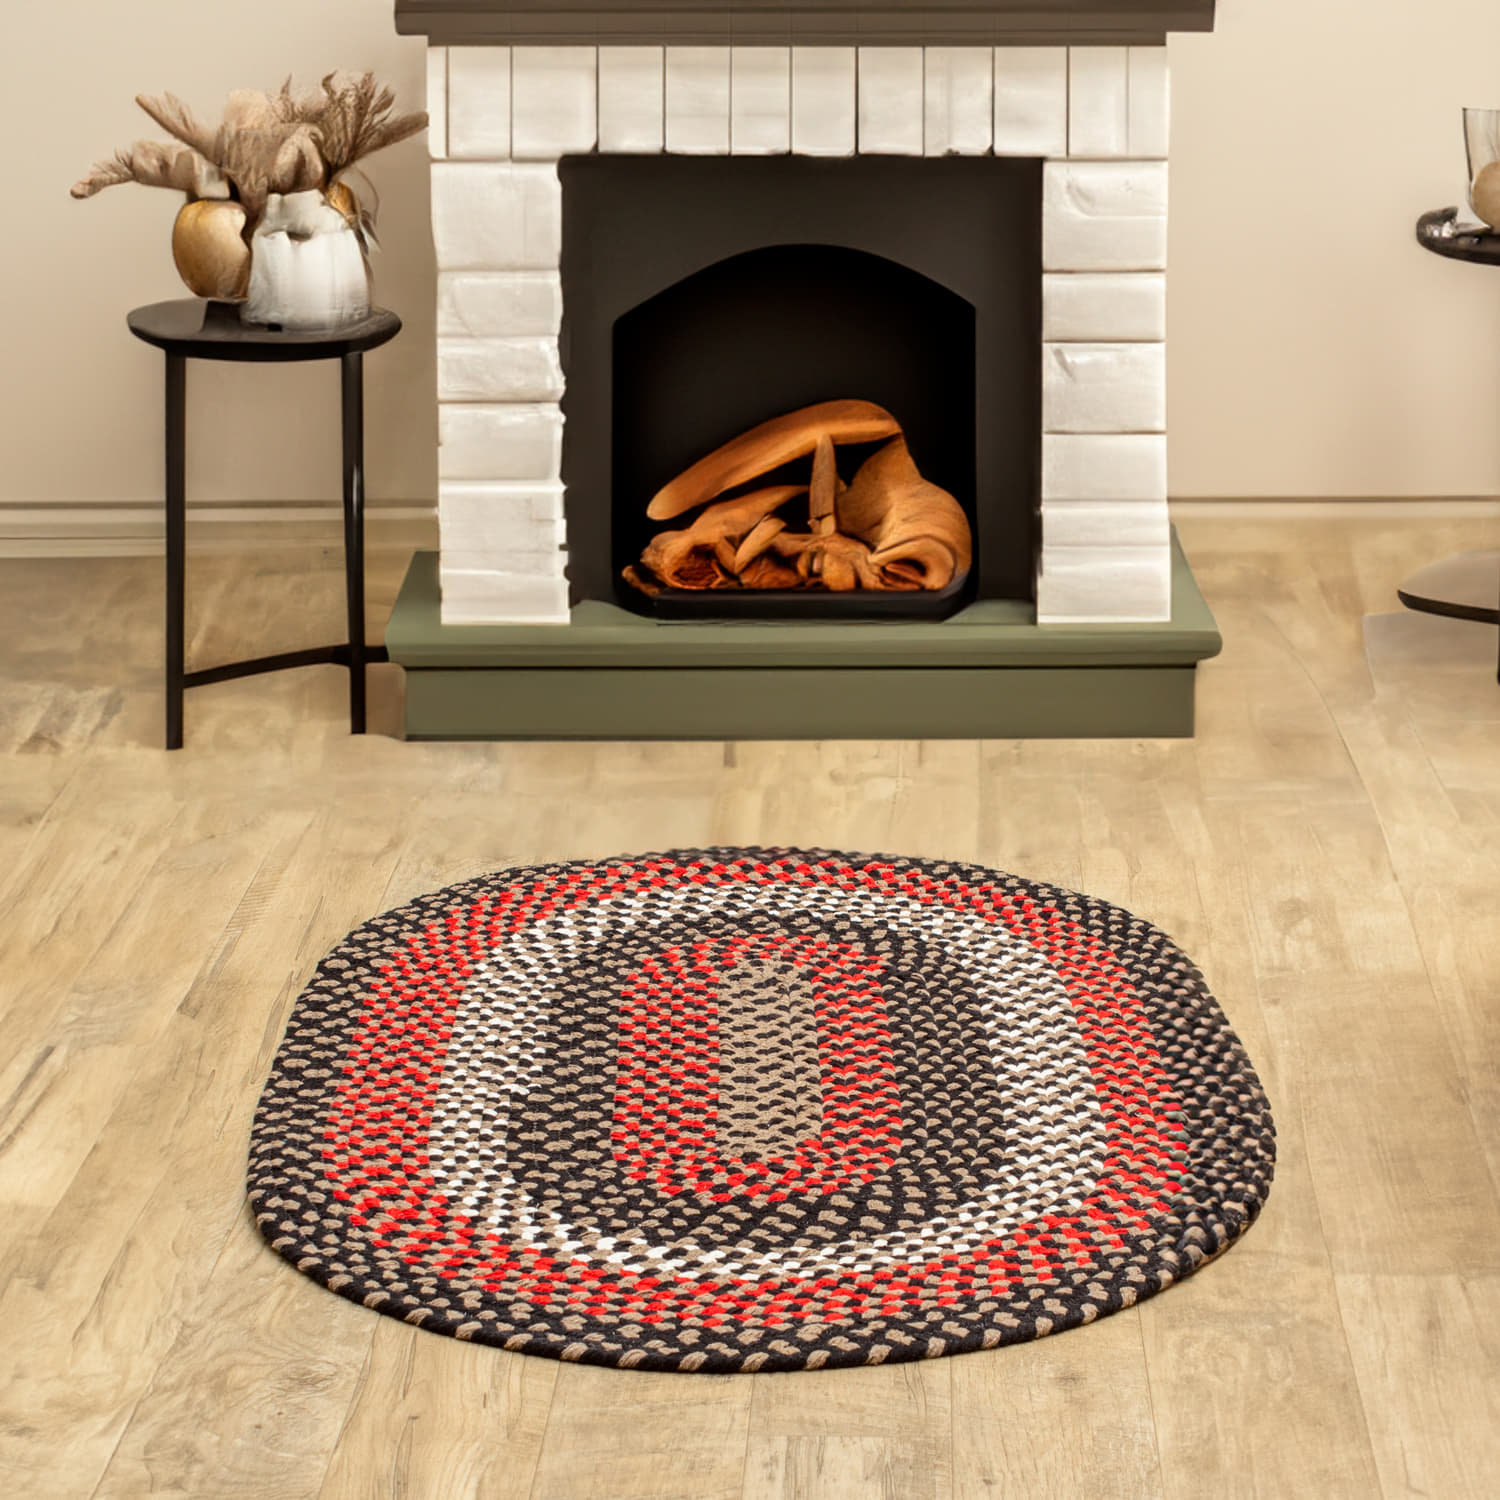 2' x 4' Country Oval Wool Braided Rug - Bring warmth to any room!